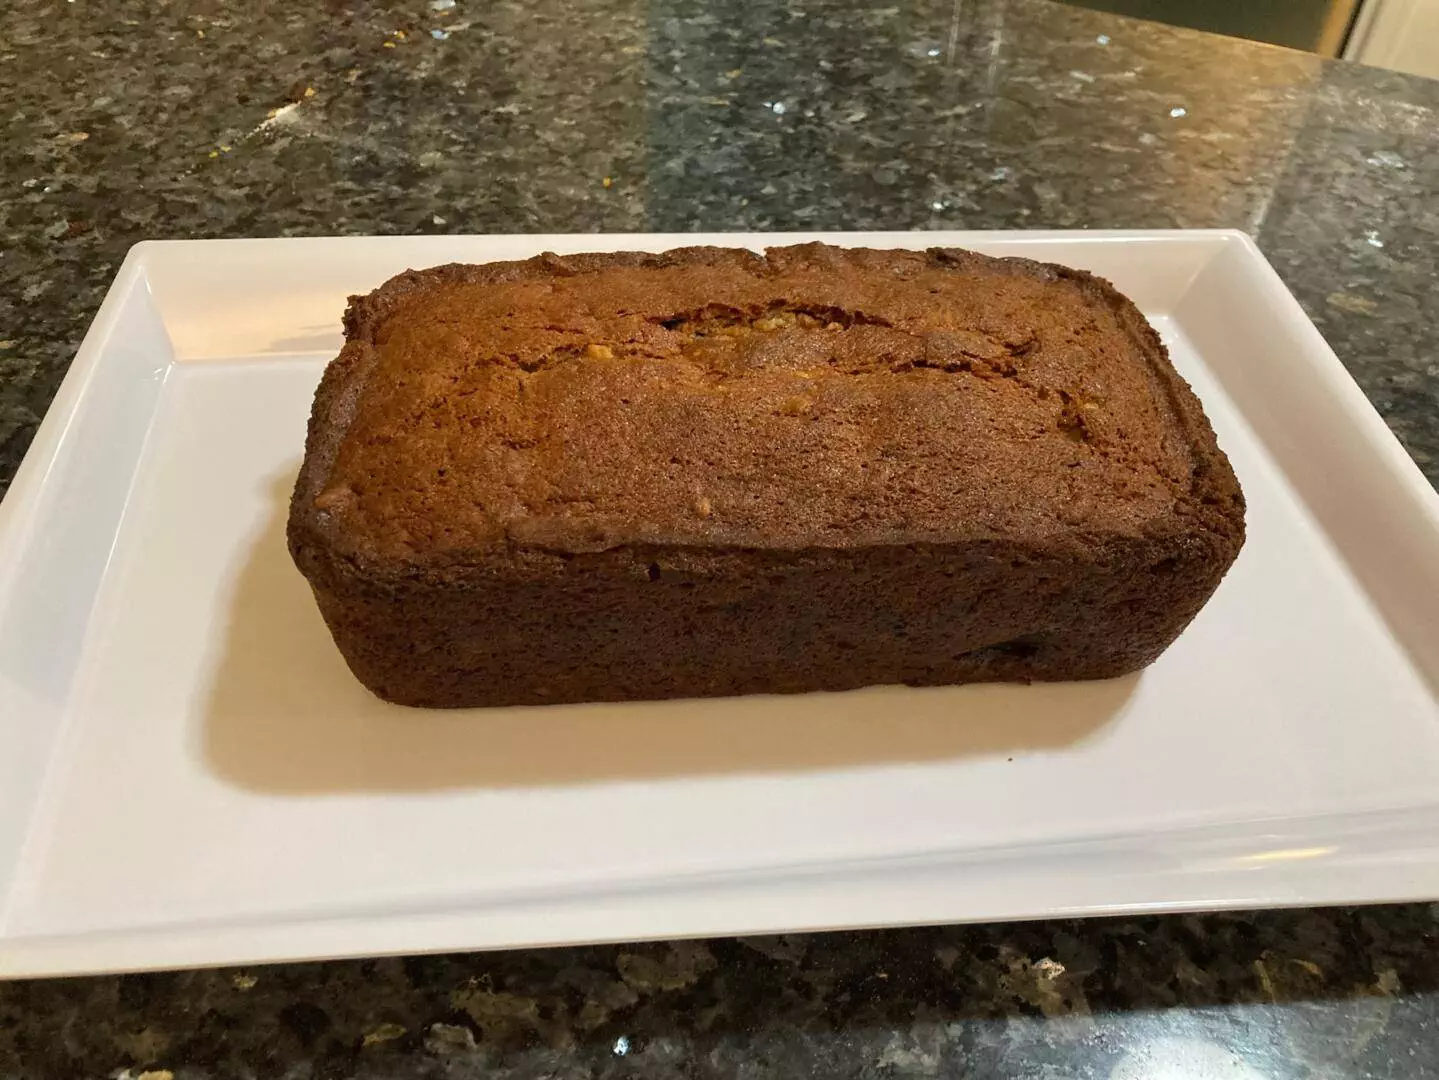 Brown Butter Banana Bread from Out of the Box Baking.com